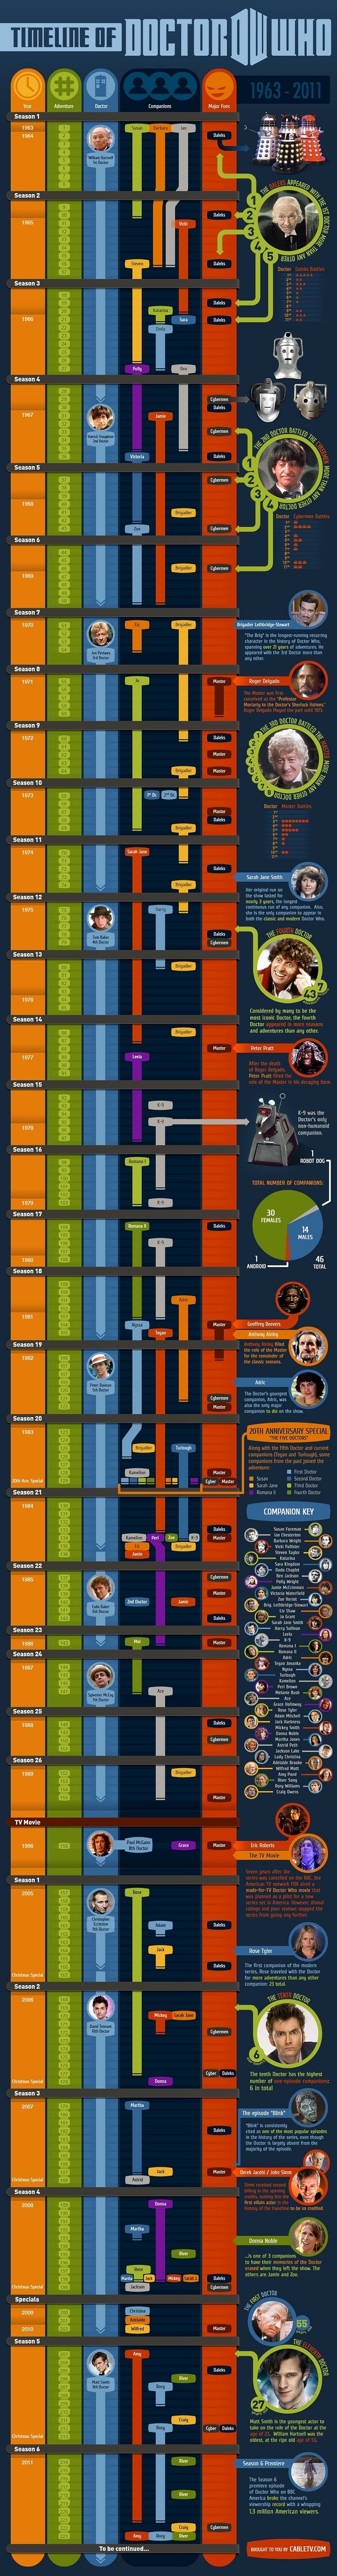 The timeline of Doctor Who